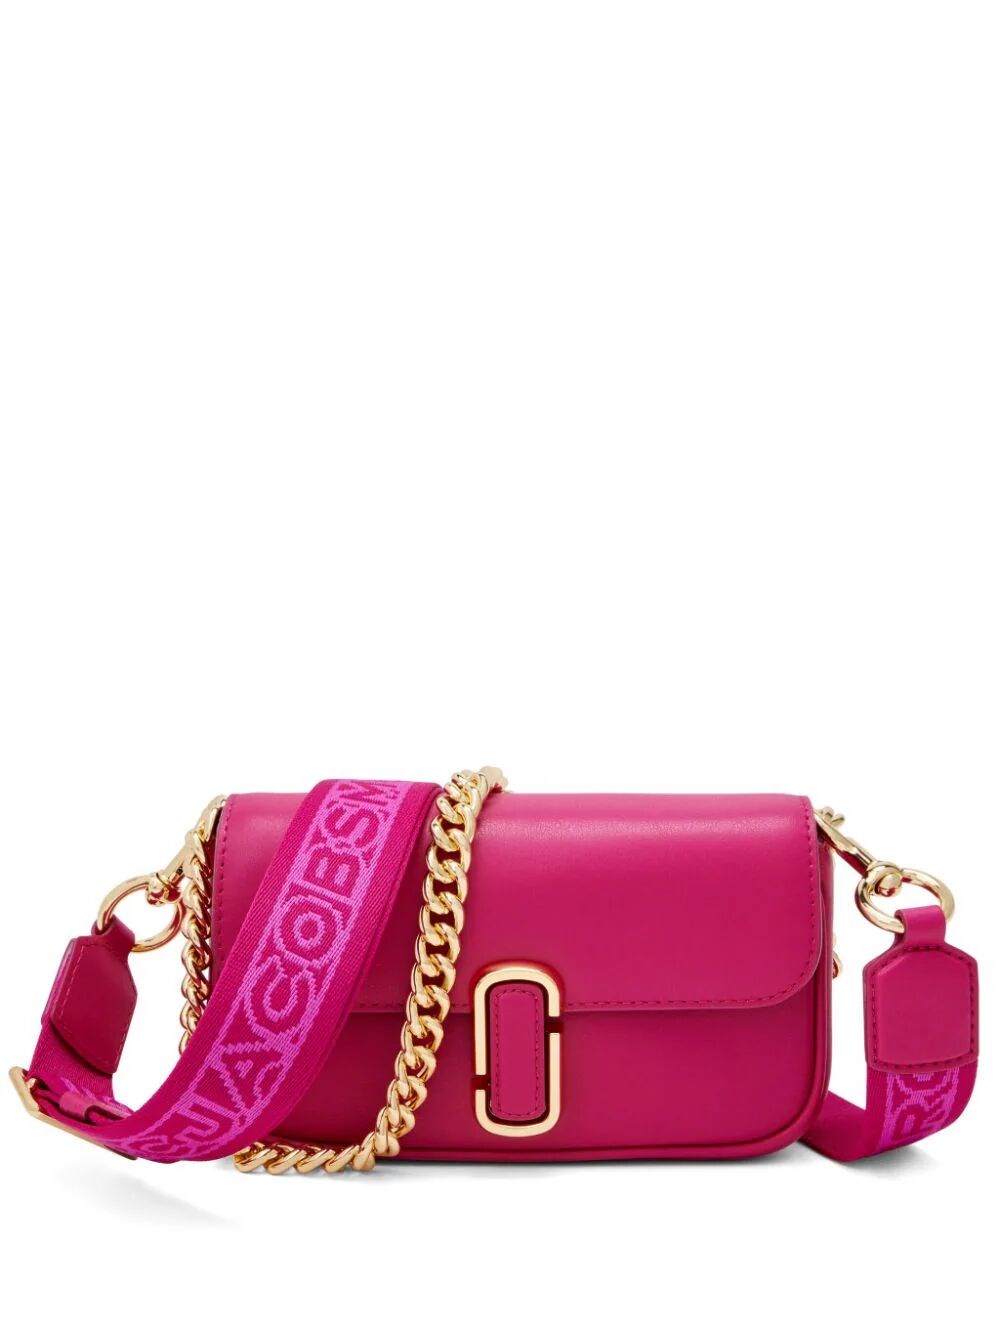 Marc Jacobs The J Marc Mini Bag In Pink & Purple